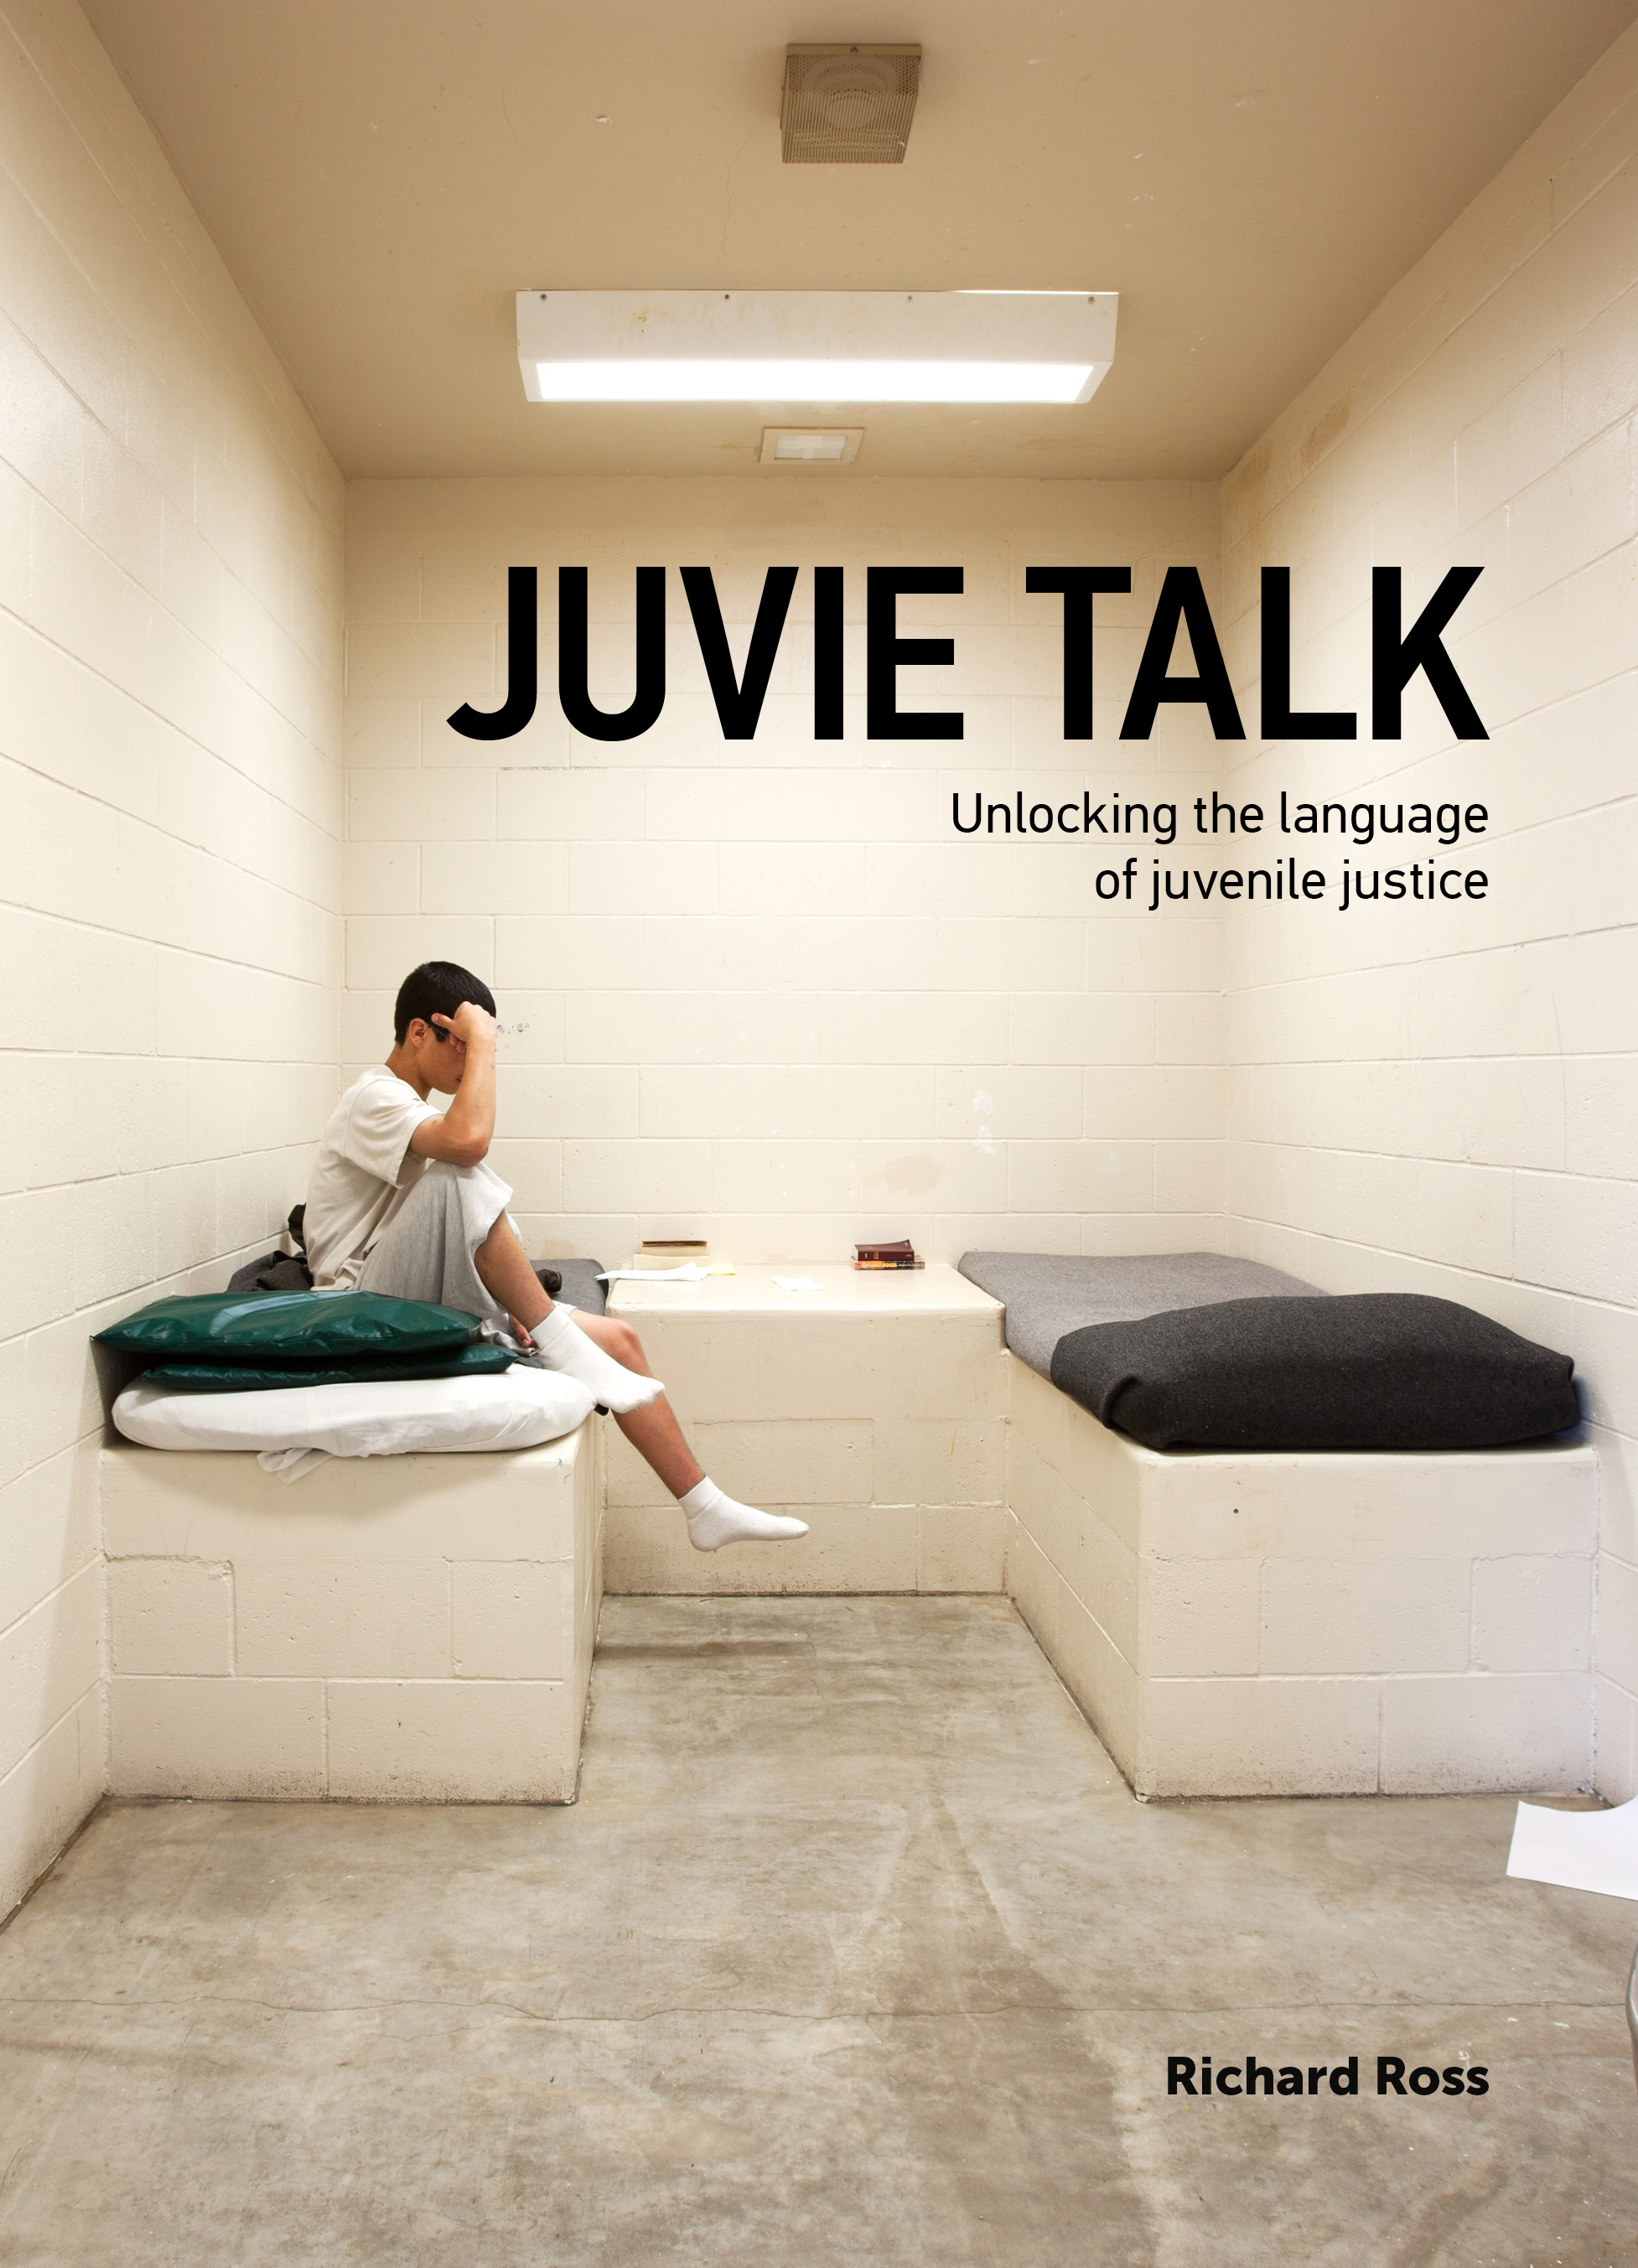 A New Book In The Juvenile In Justice Series Released By Uf Alumnus